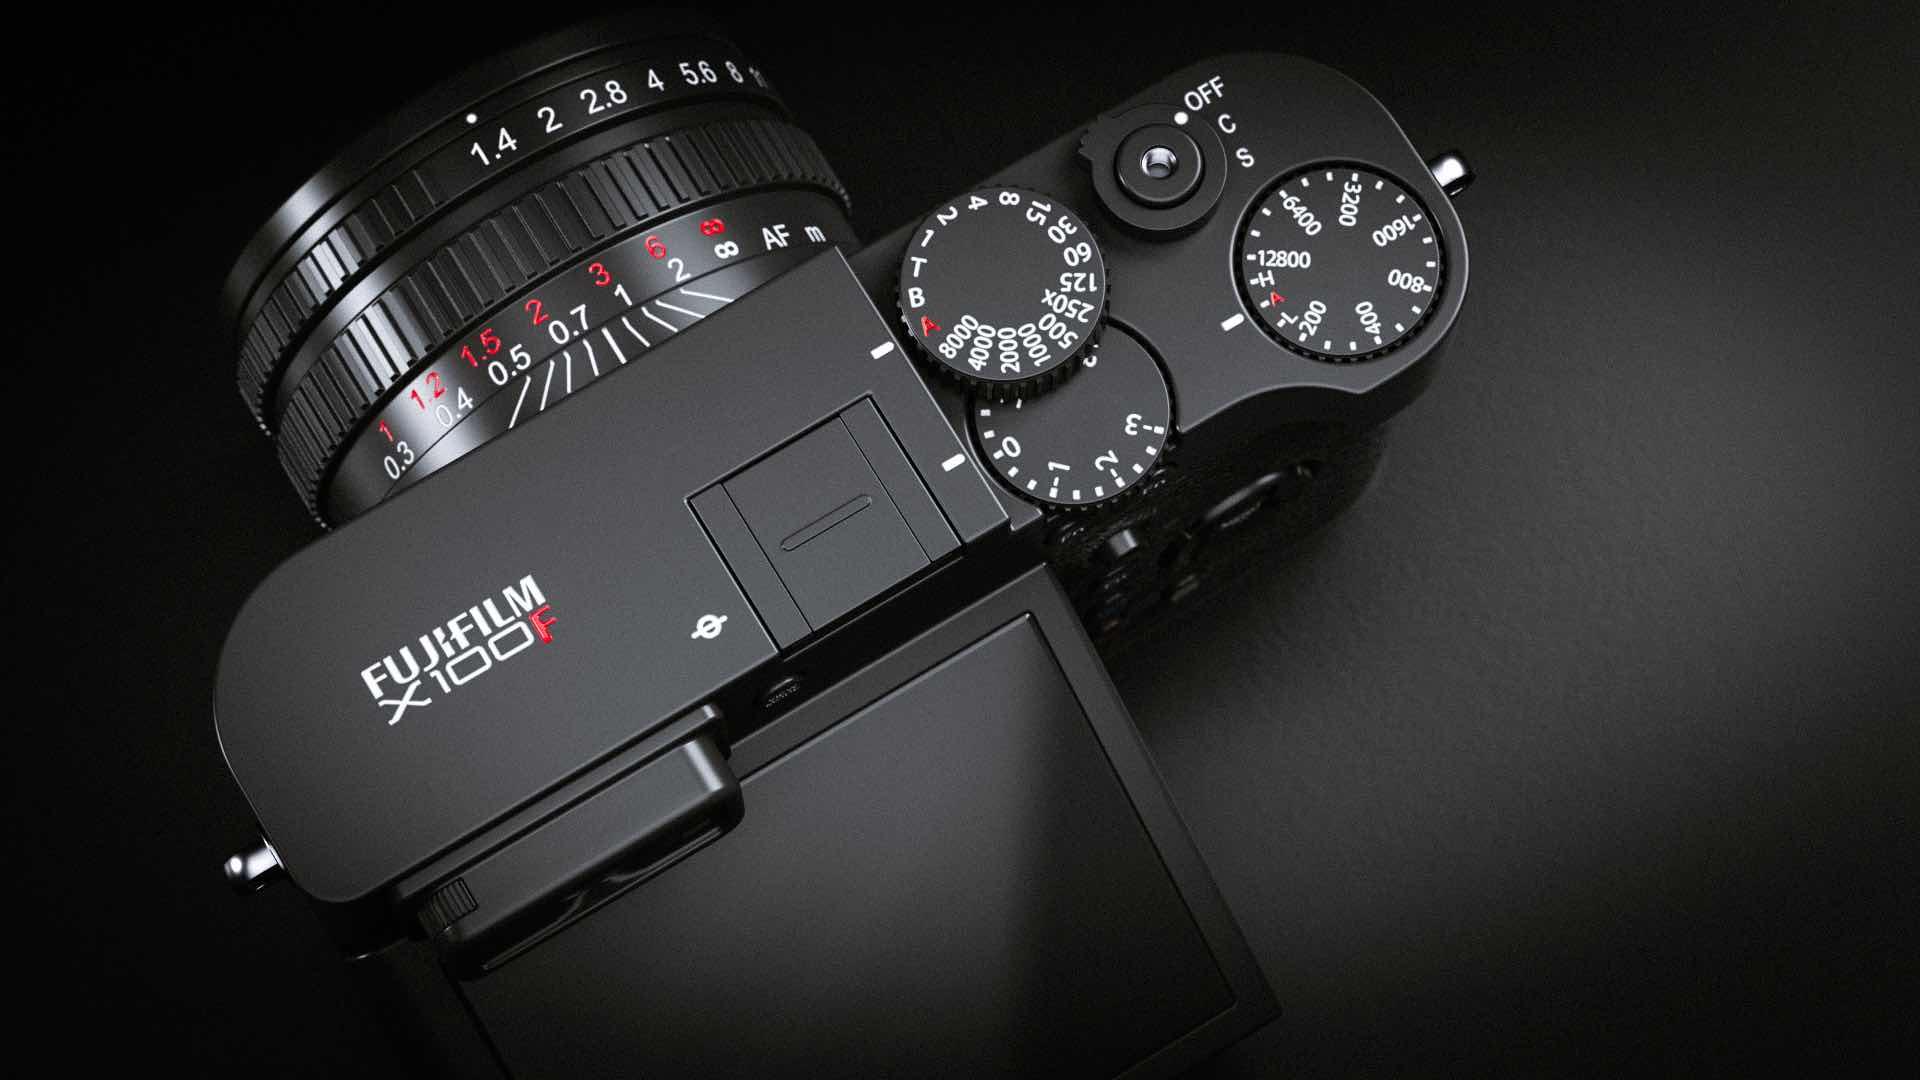 The Perfect Fujifilm X100F designed by X-shooter Andreas